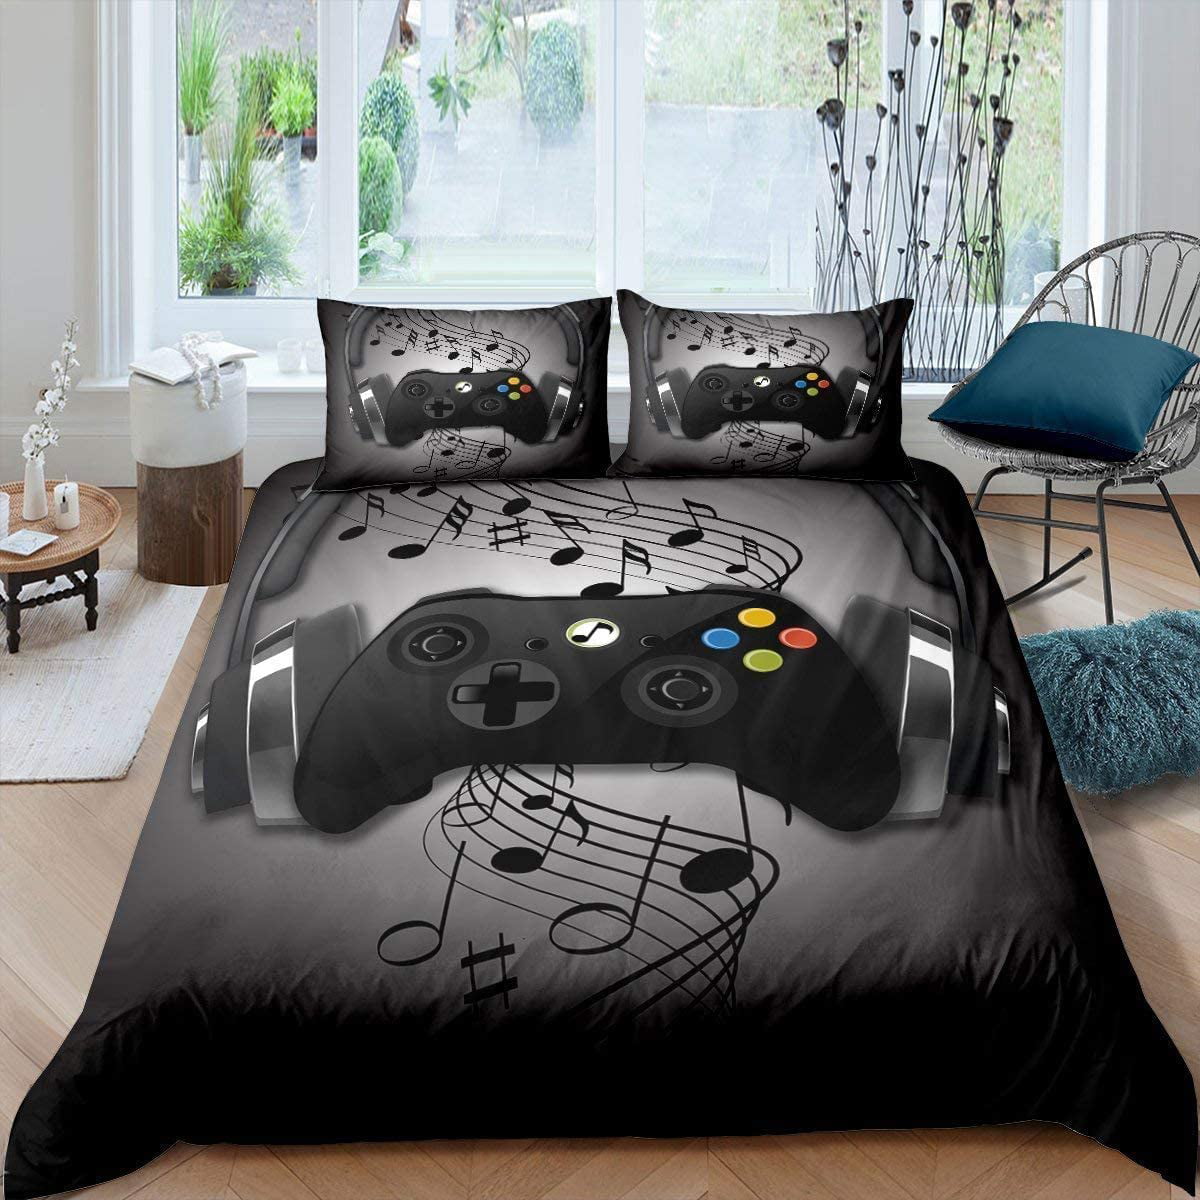 1 Fitted Sheet with 2 Pillow Cases Kids Gamepad Sheet Set Control Button Bedding Set for Boys Girls Children Teens Fitted Sheet Bright Grey Lightweight Cool Boy Style Bed Coevr Full Size 